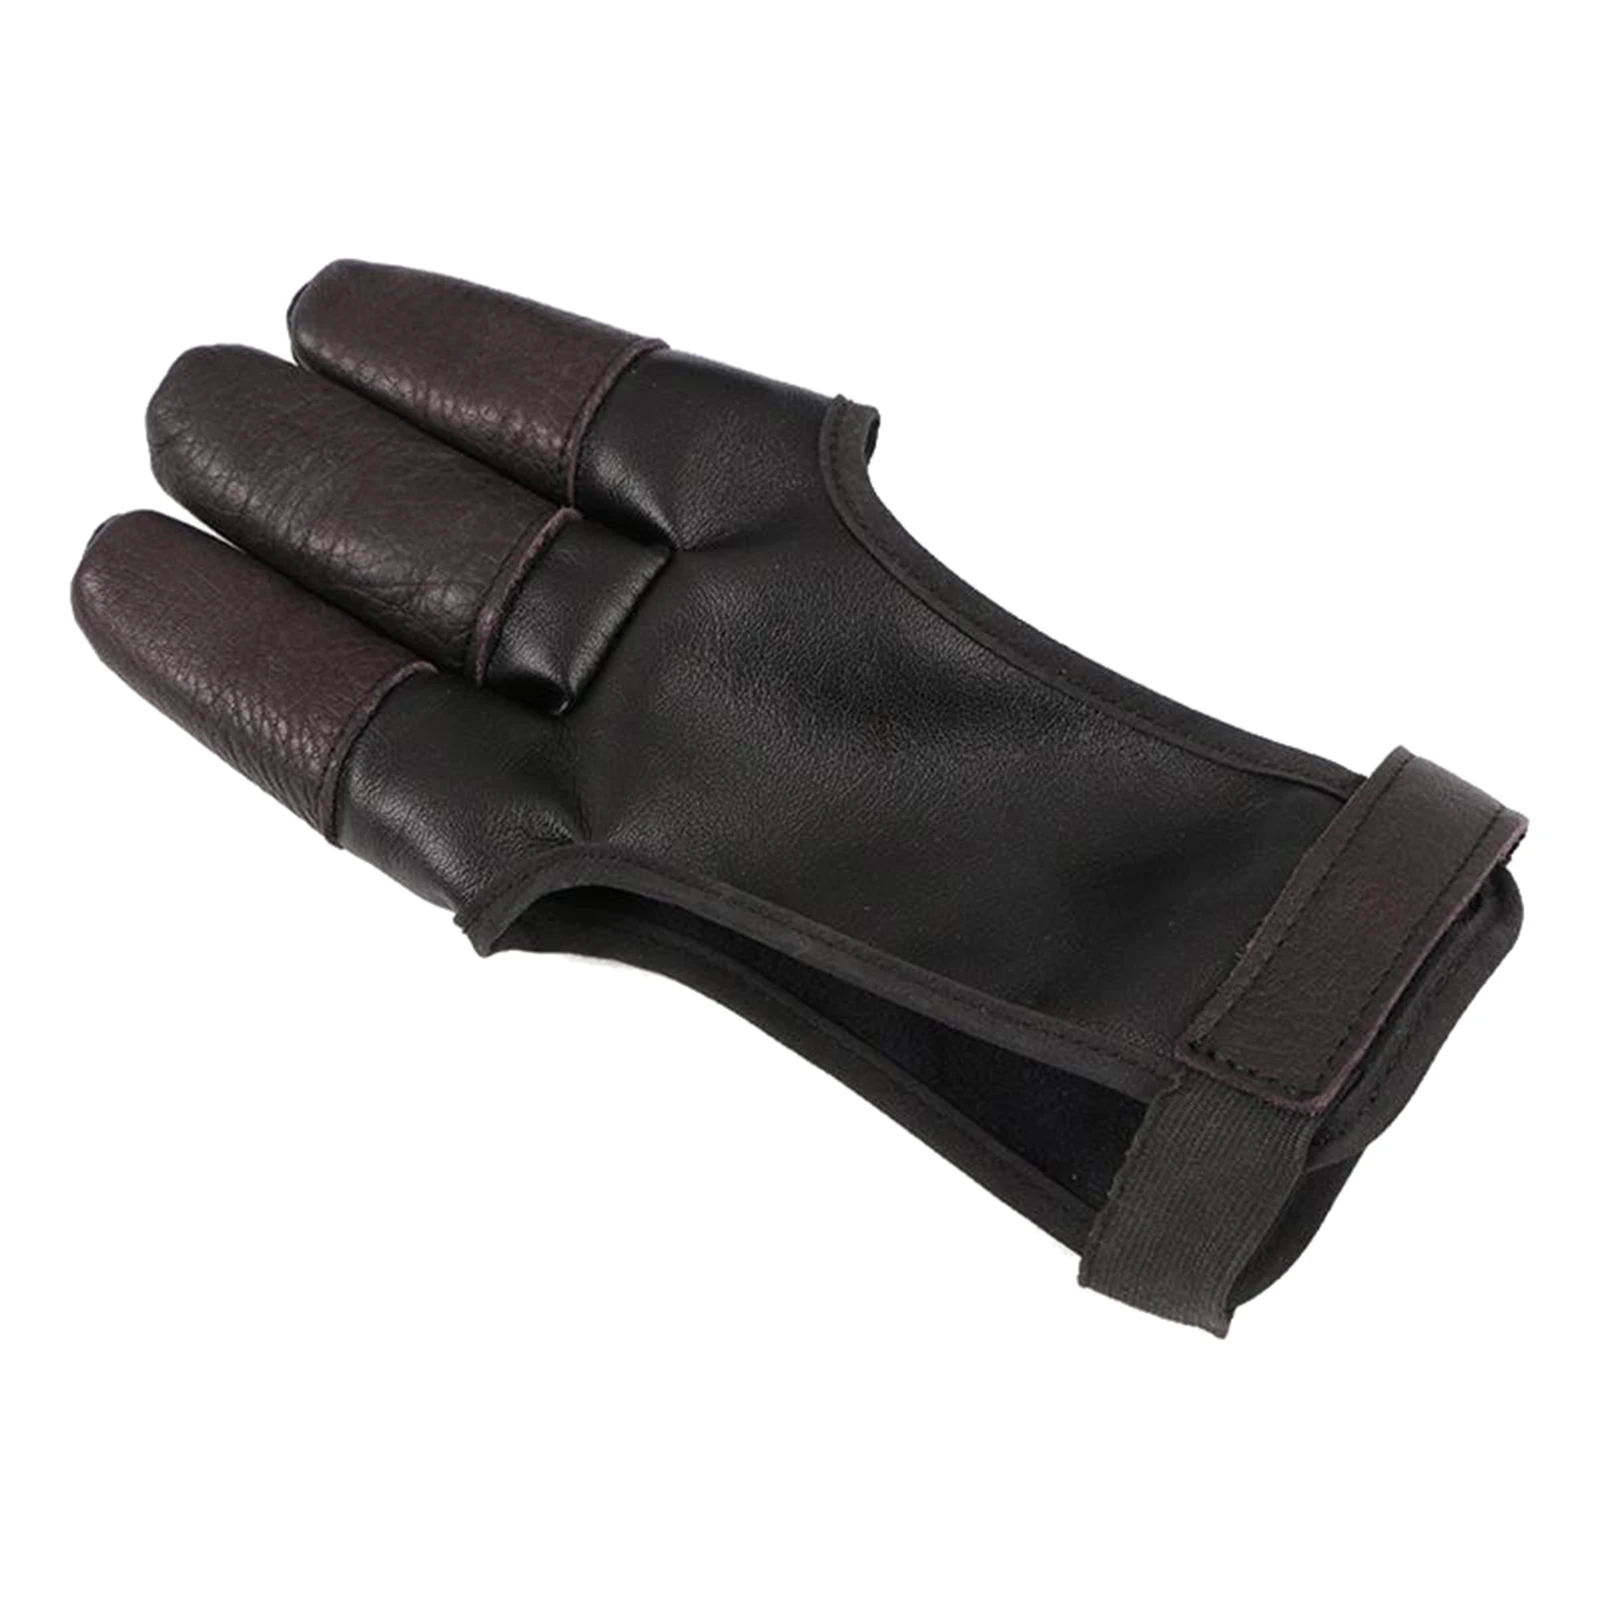 Leather Archery Gloves 3-Finger 19x5cm  Fingers Tab Guard Protector